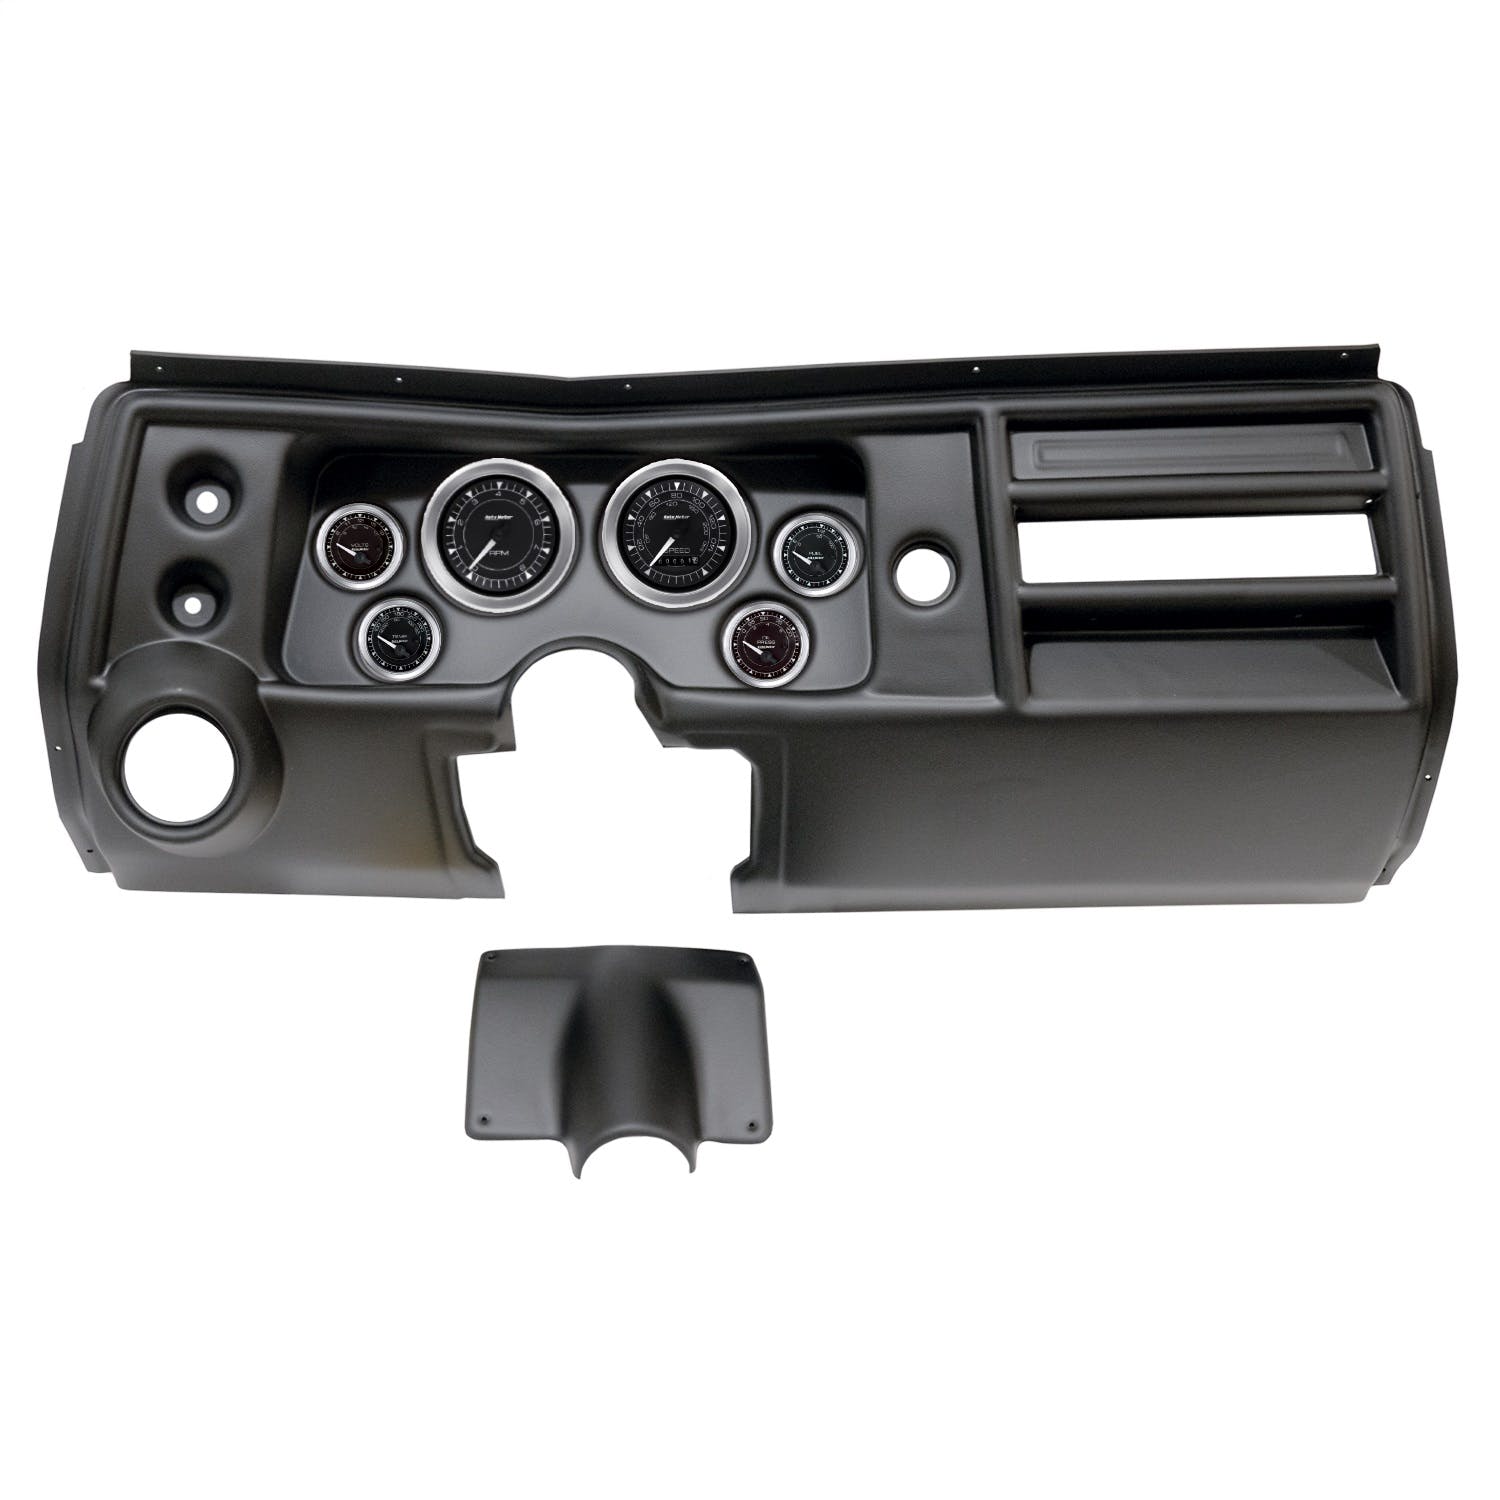 AutoMeter Products 2902-04 6 Gauge Direct-Fit Dash Kit, Chevy Chevelle Vent 68, Chrono